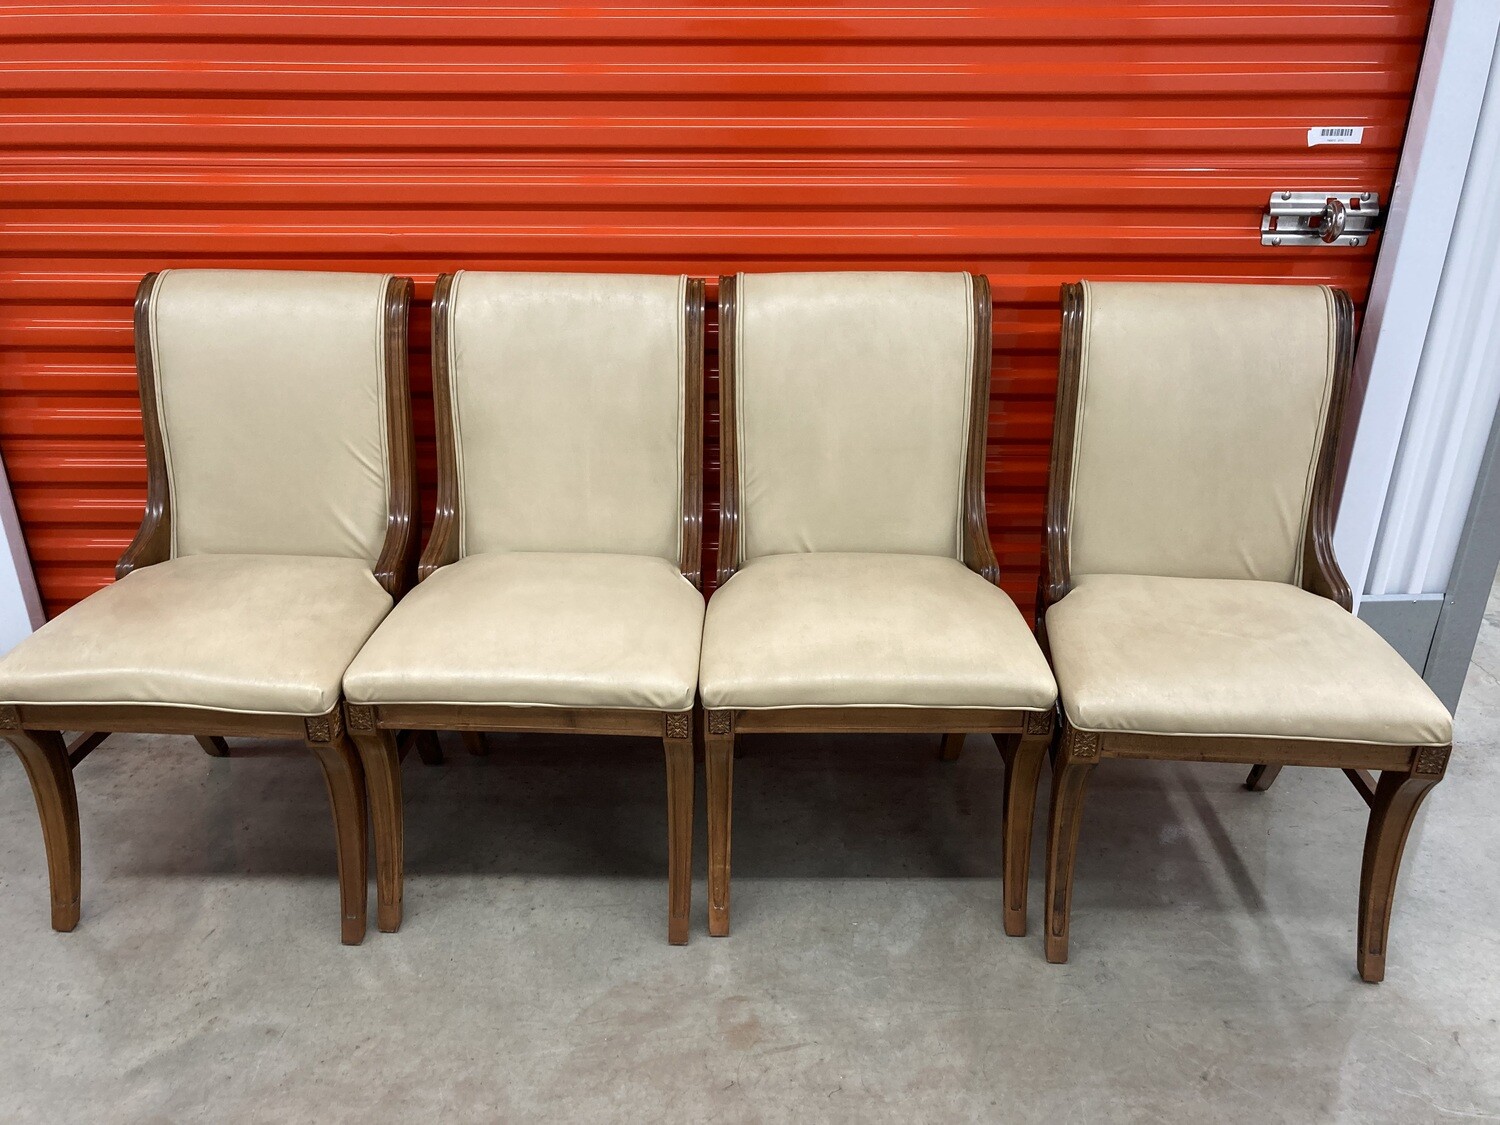 Set of 4 Ornate Dining Chairs, gingham back! #2009